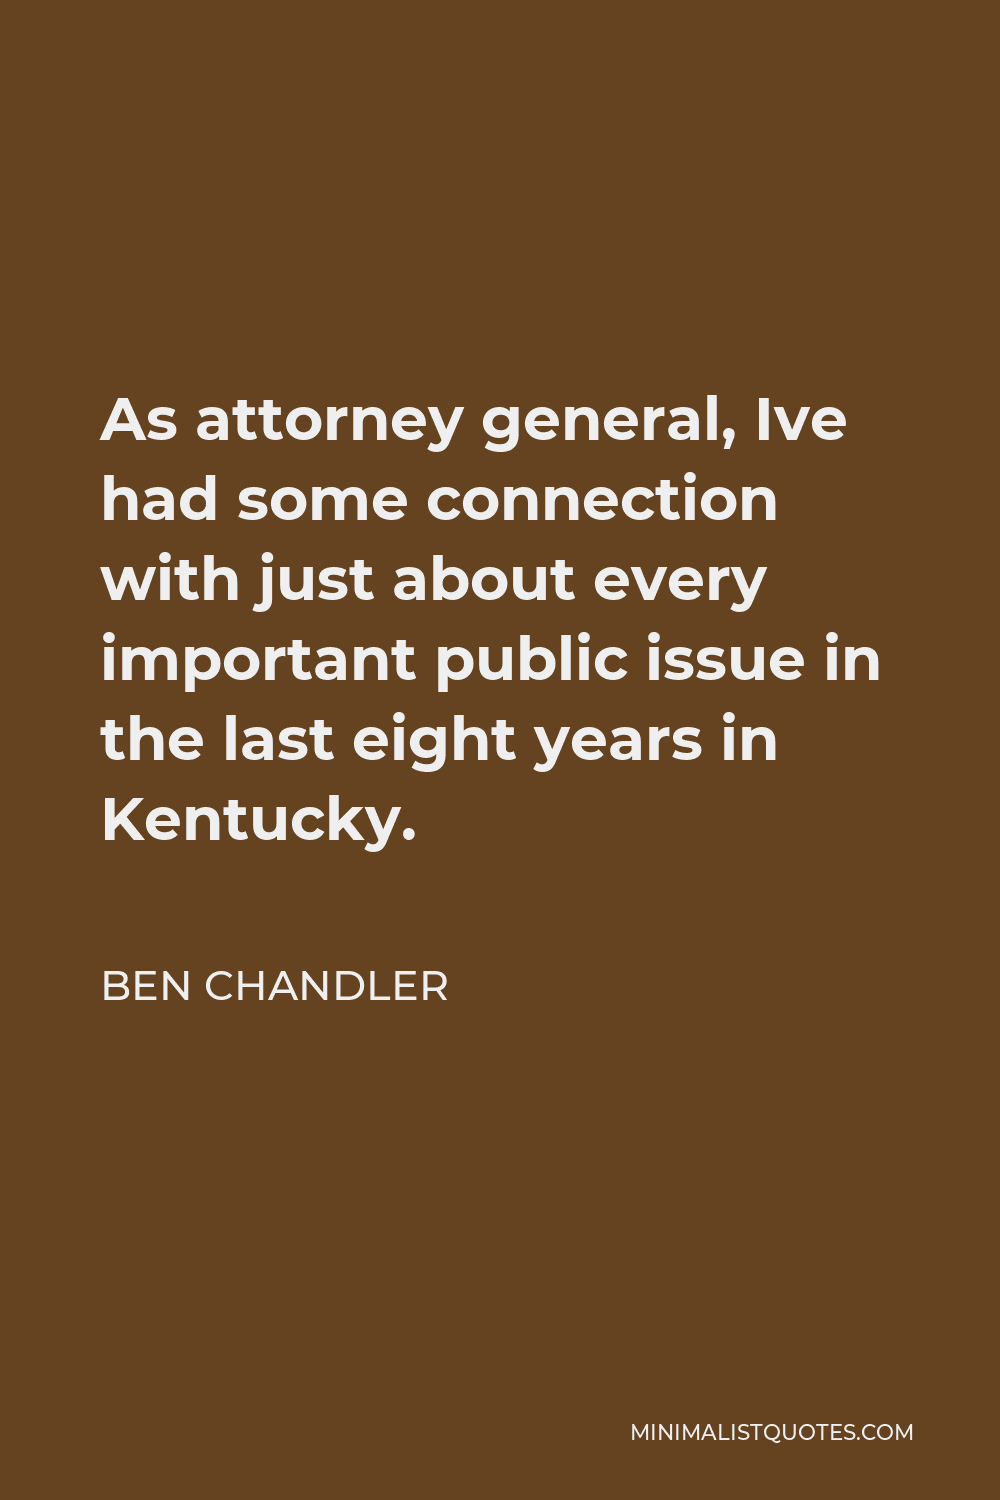 Ben Chandler Quote - As attorney general, Ive had some connection with just about every important public issue in the last eight years in Kentucky.